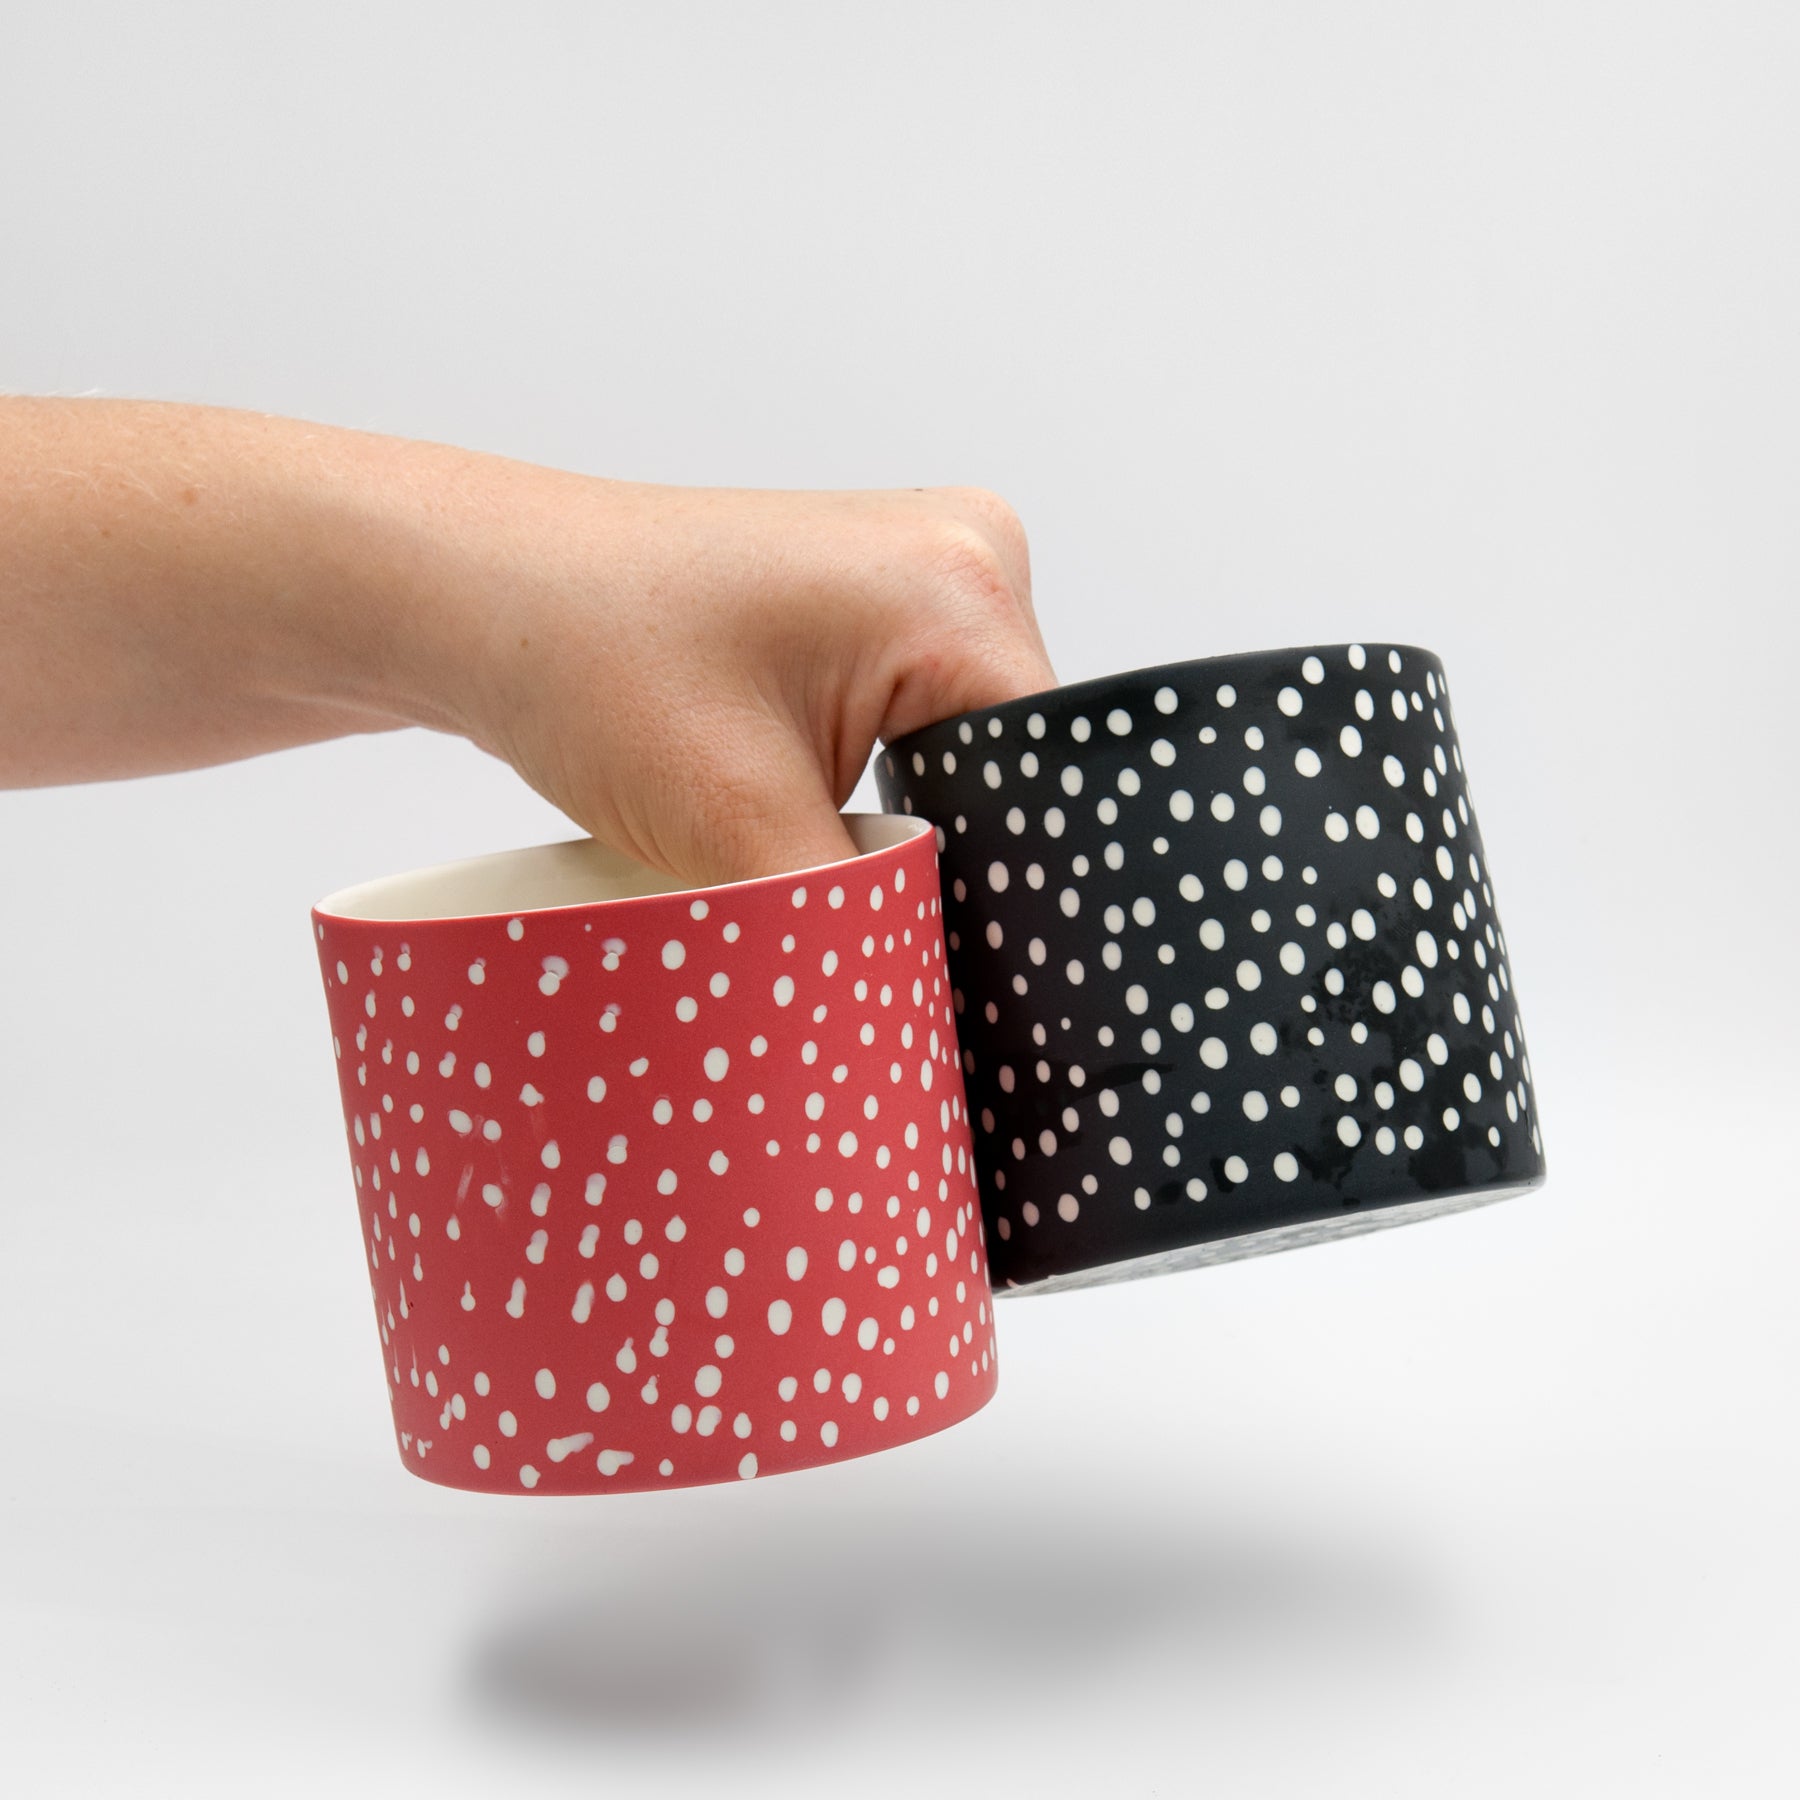 Polka dot cup, red